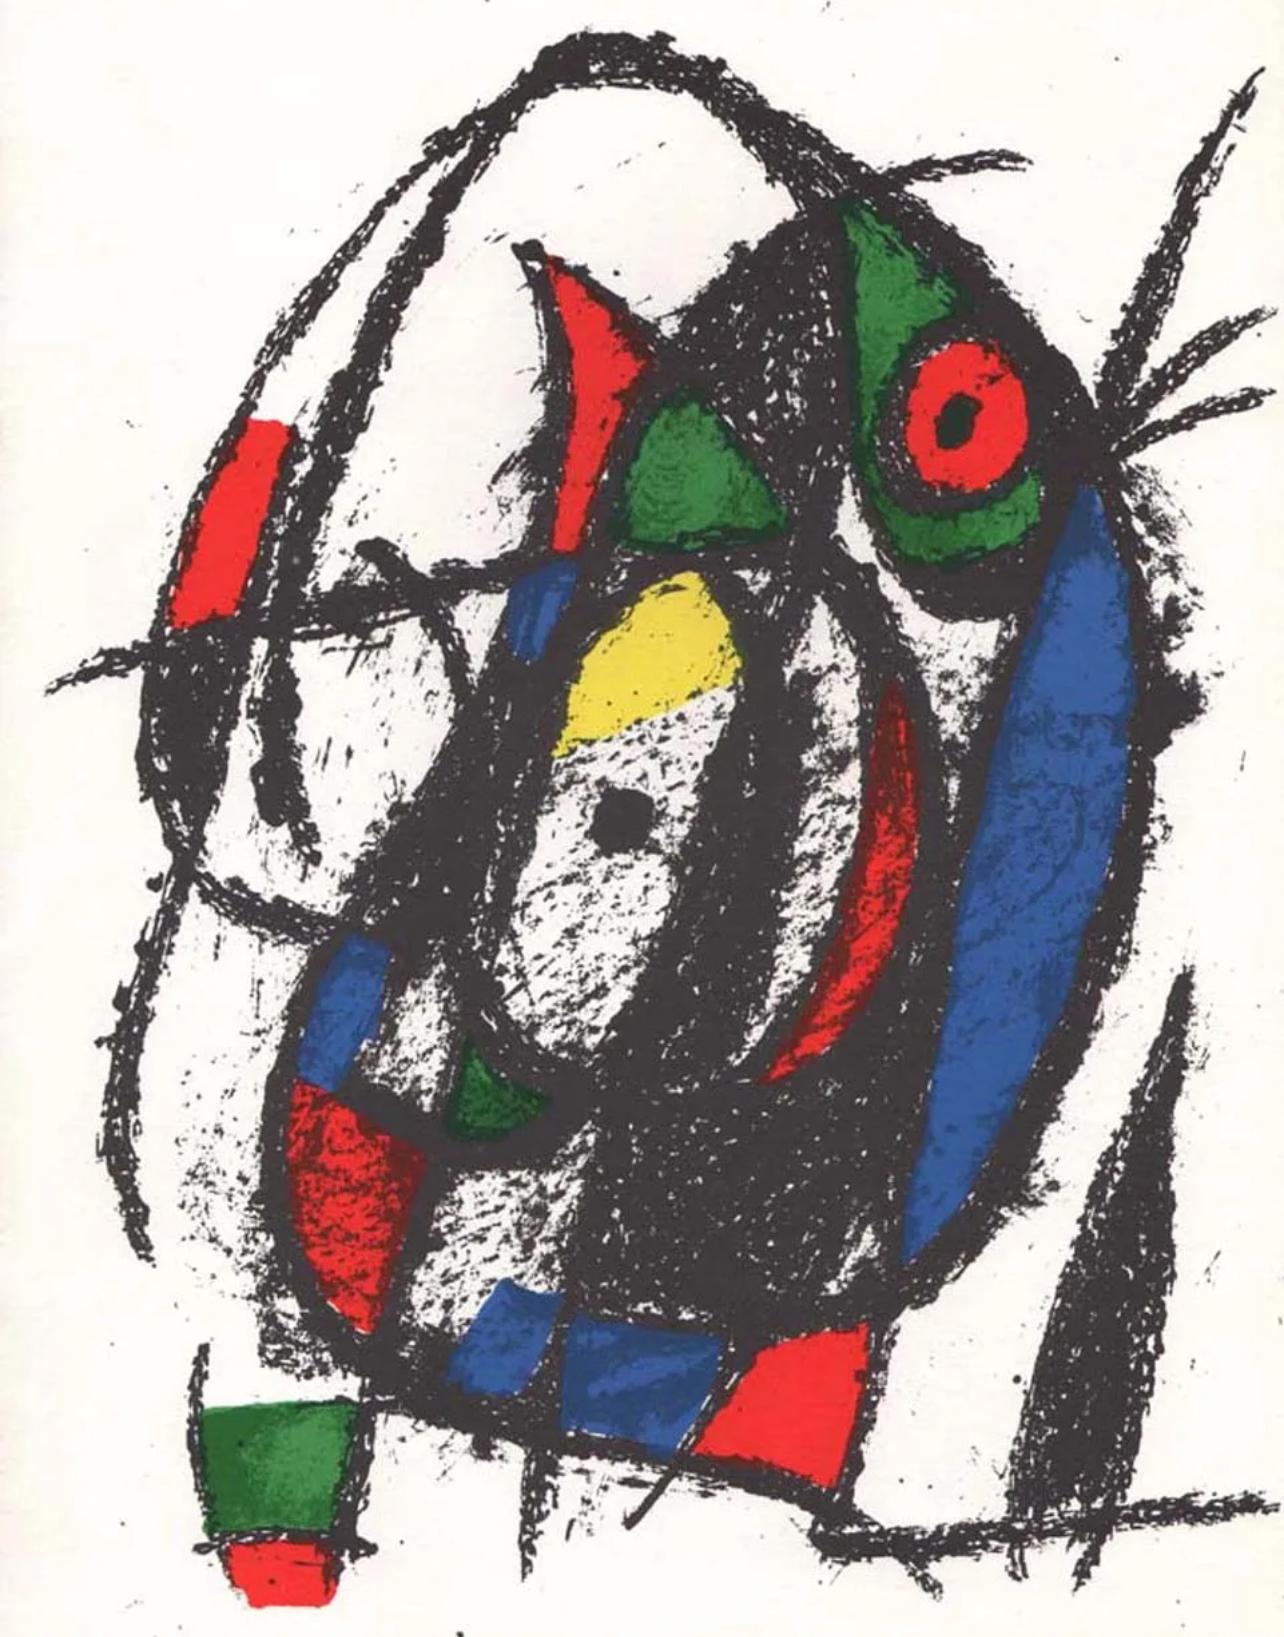 Joan Miró Abstract Print - Miro, Composition (Mourlot 1040), 1975 (after)